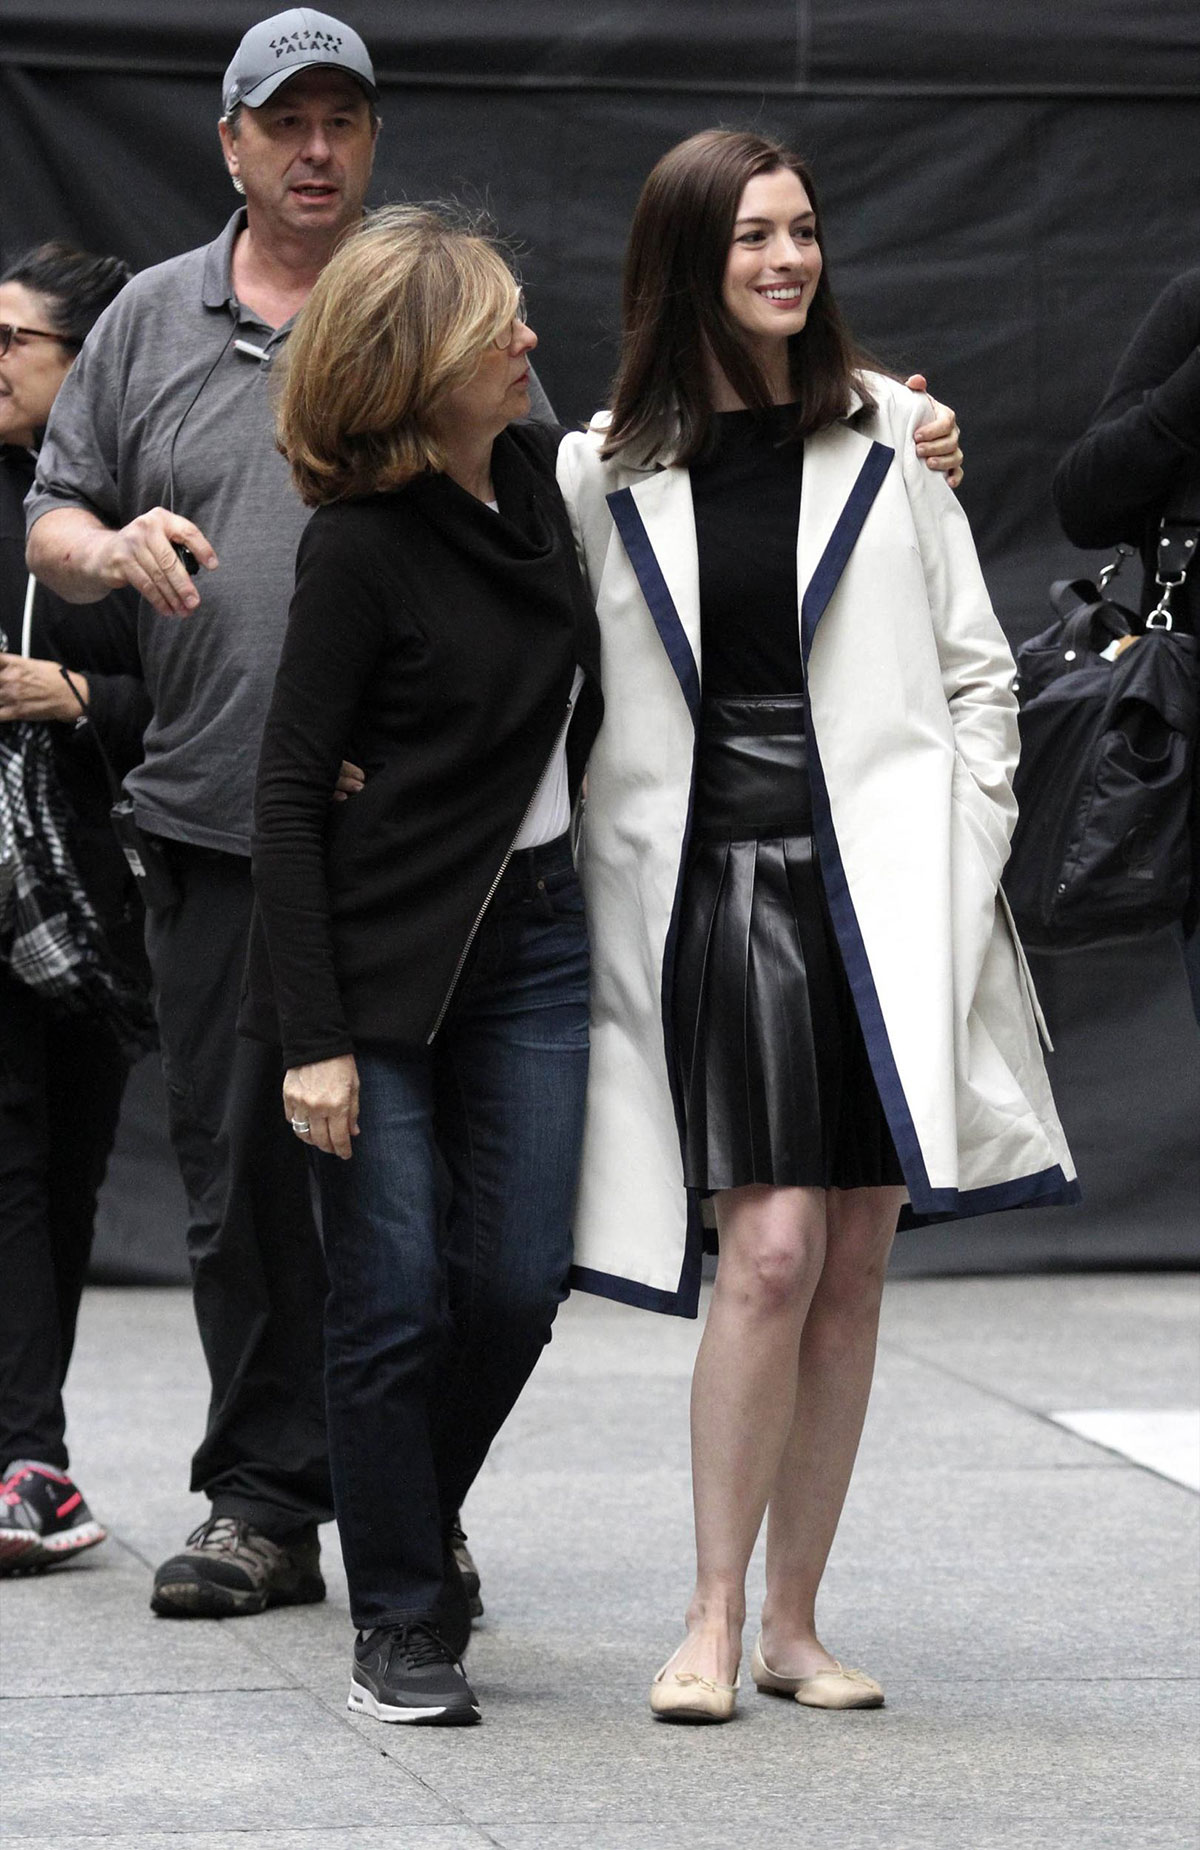 Anne Hathaway on the set of The Intern